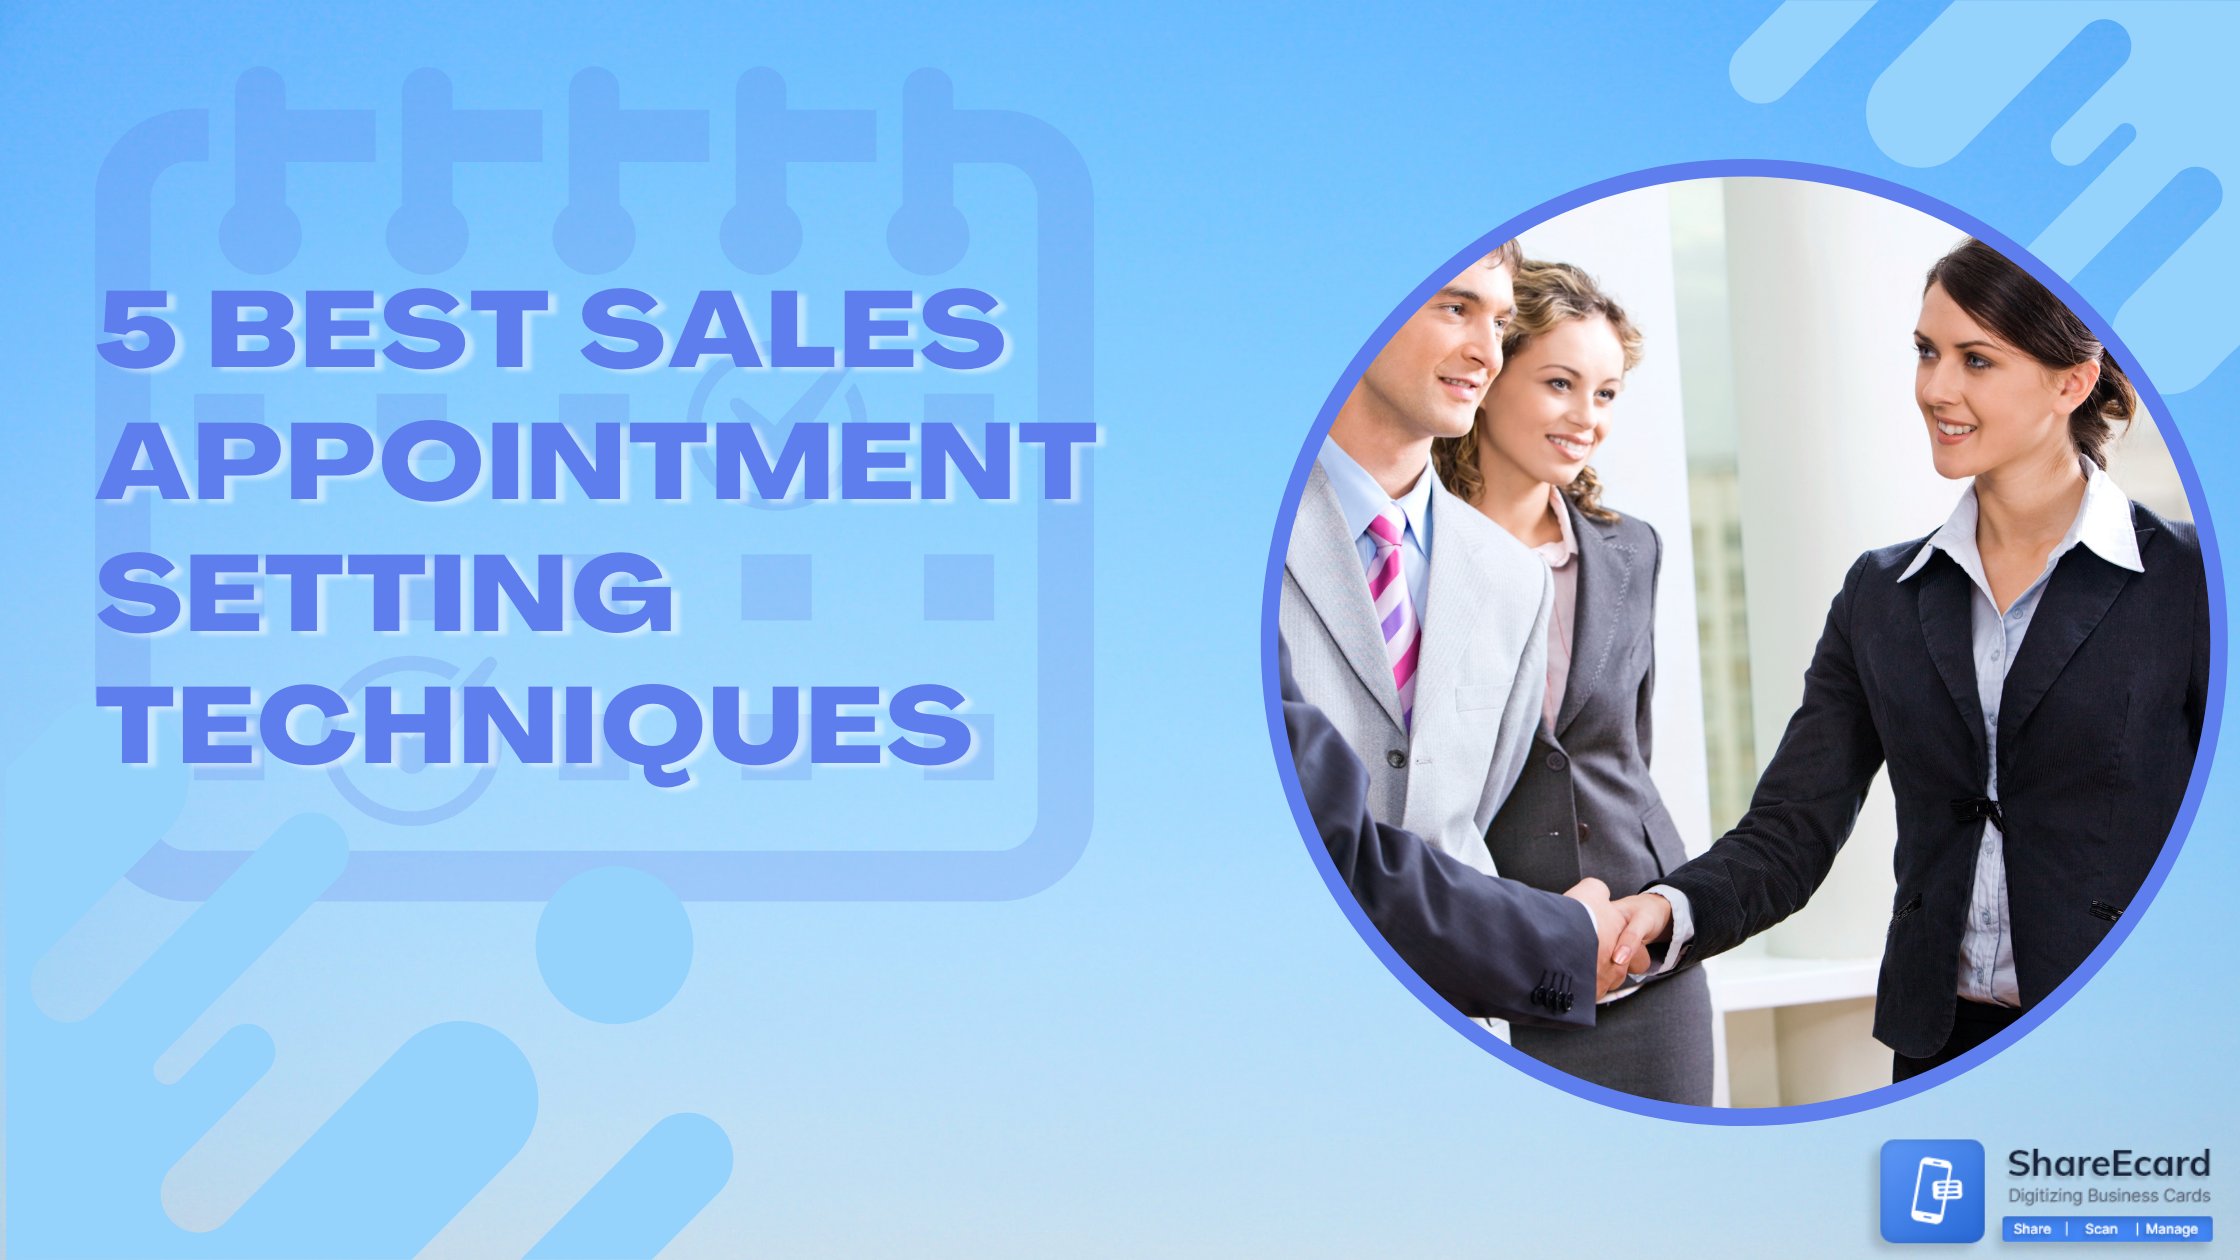 5 Best Sales Appointment Setting Techniques